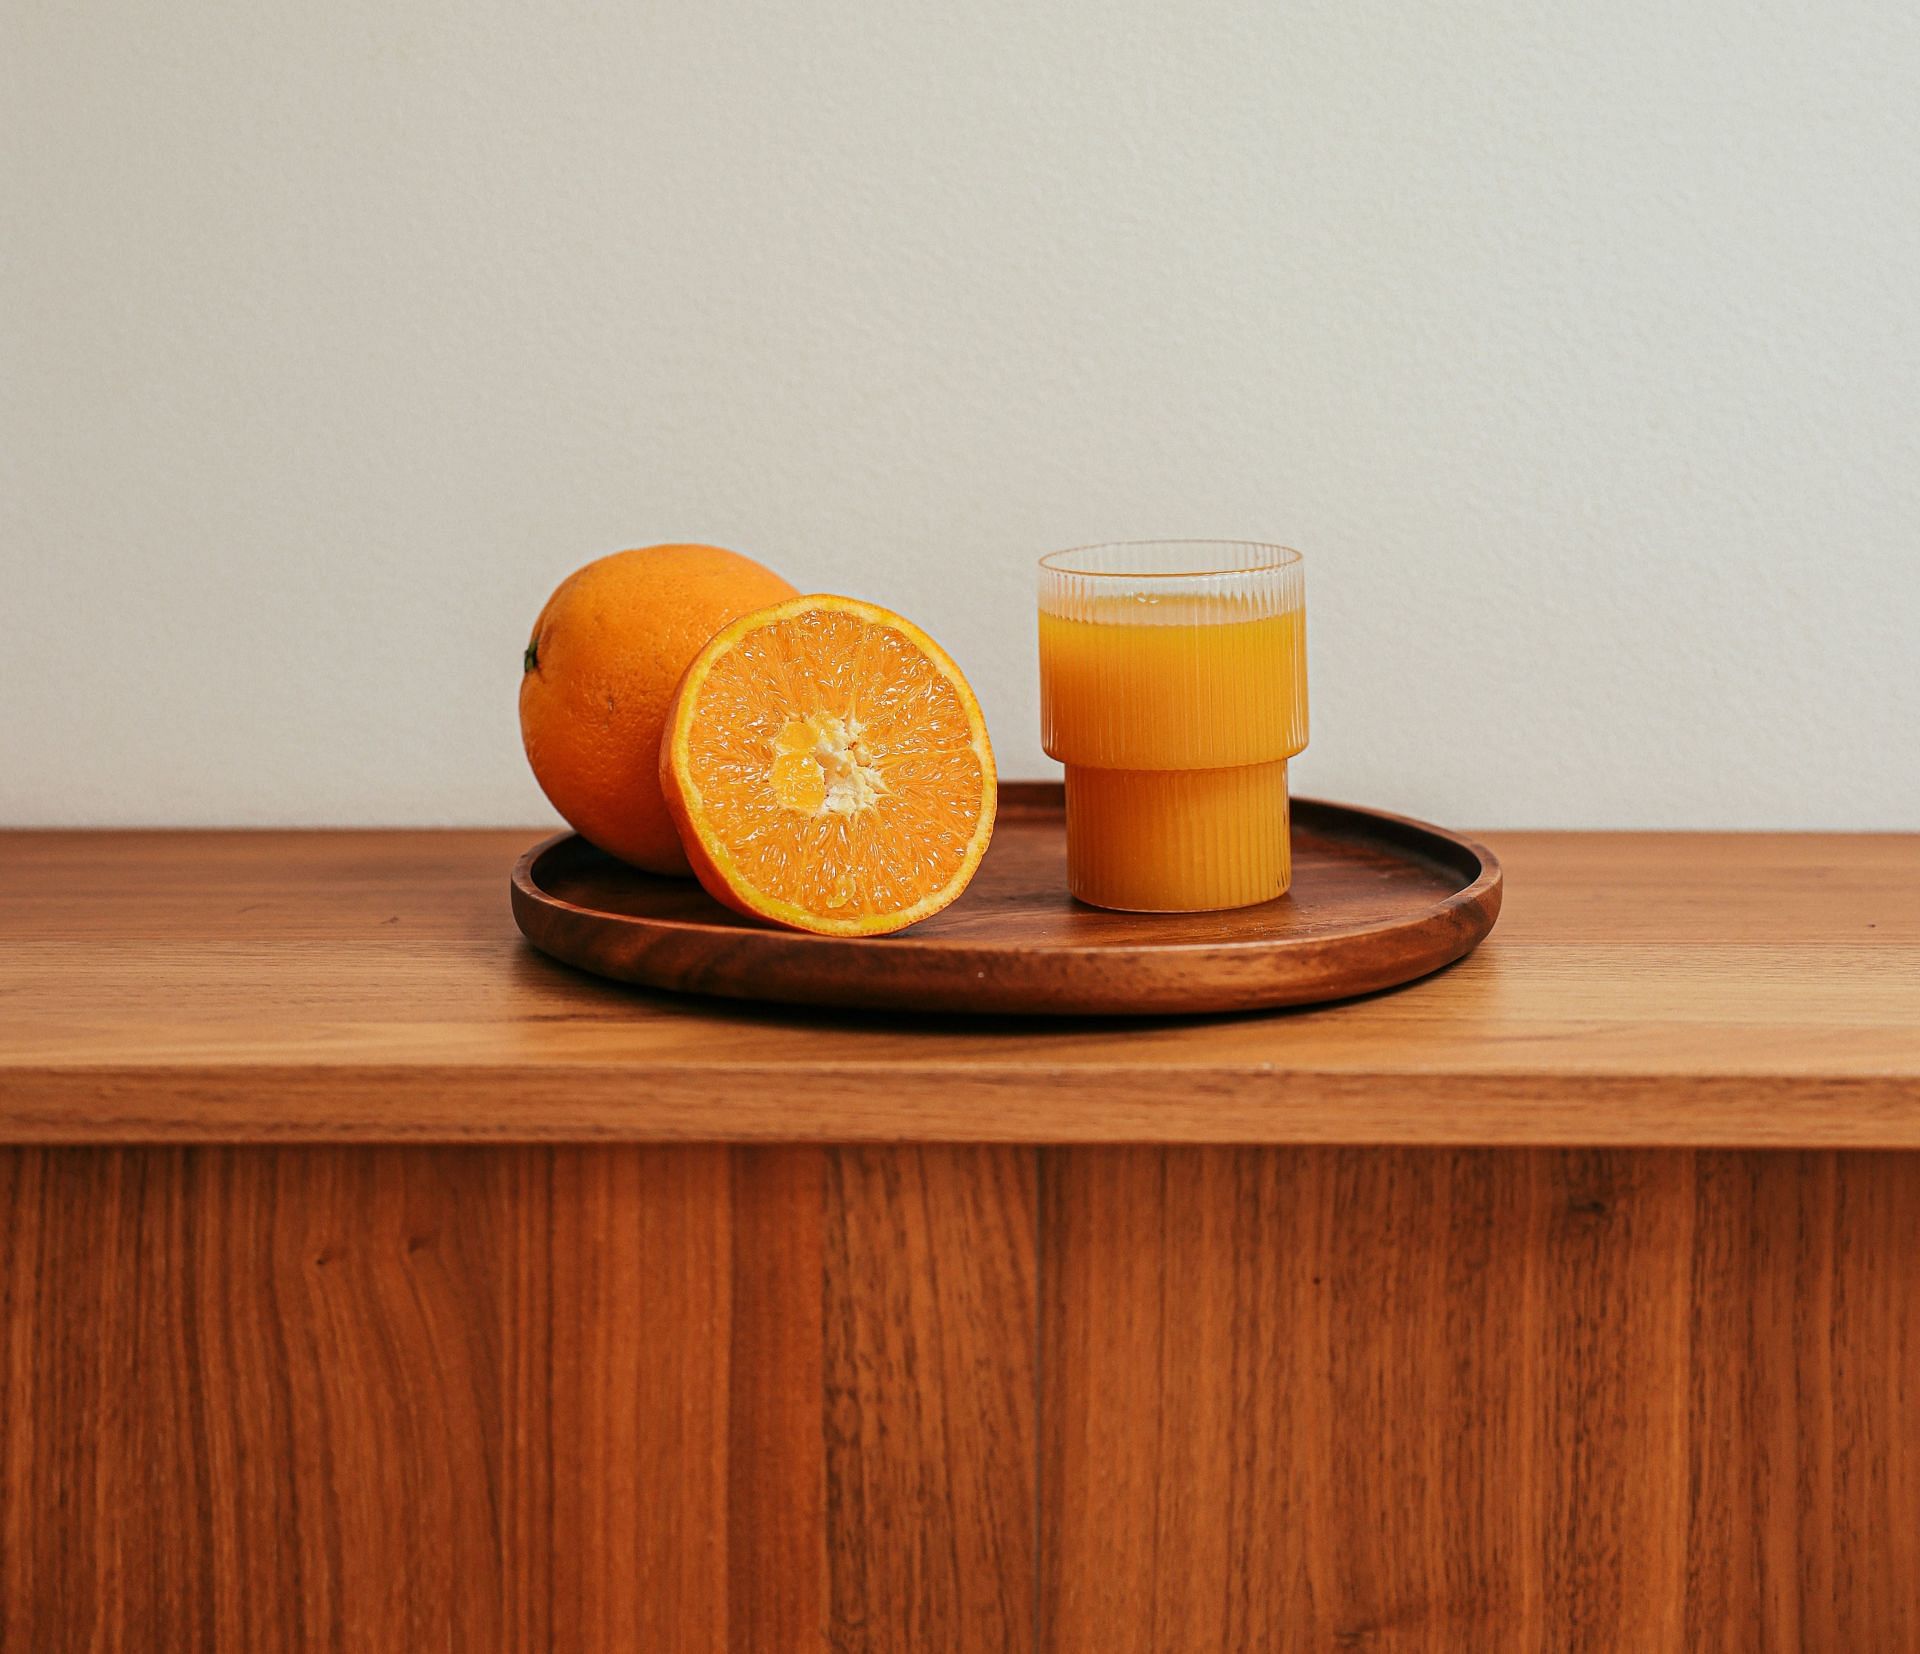 Curing hangover with orange juice (Image via Pexels / Cup of couple)